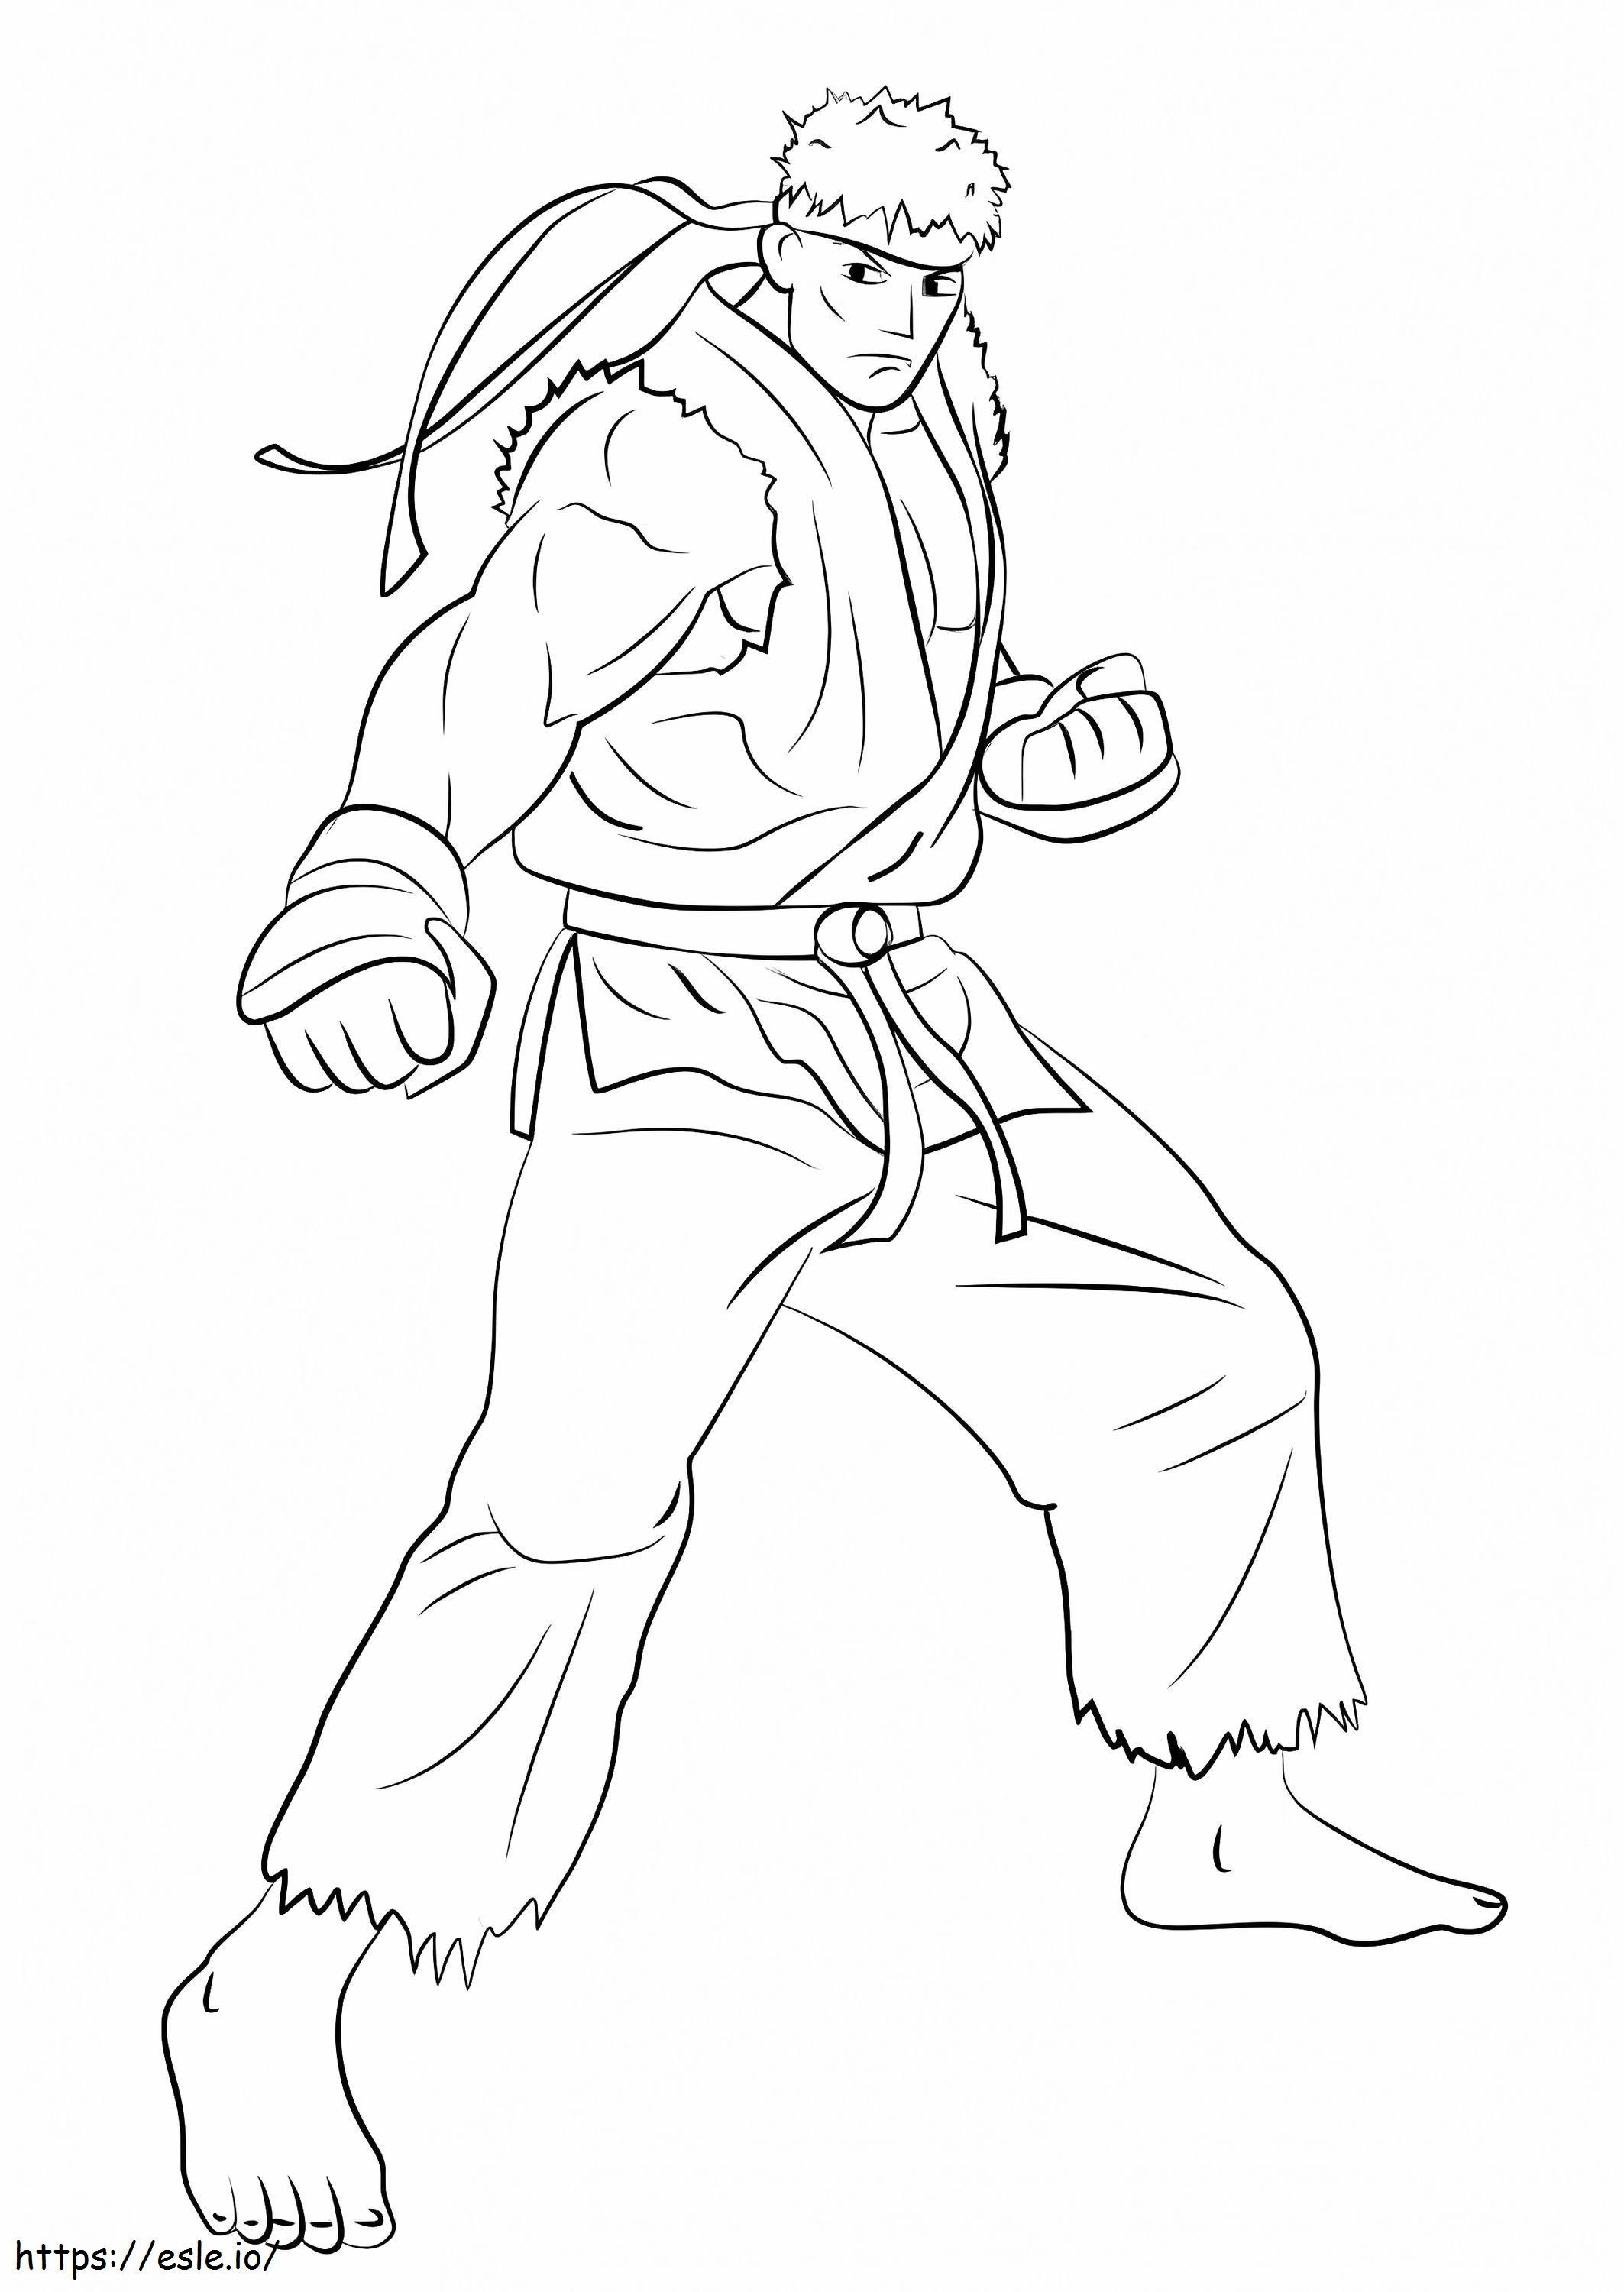 Ryu Fighting coloring page